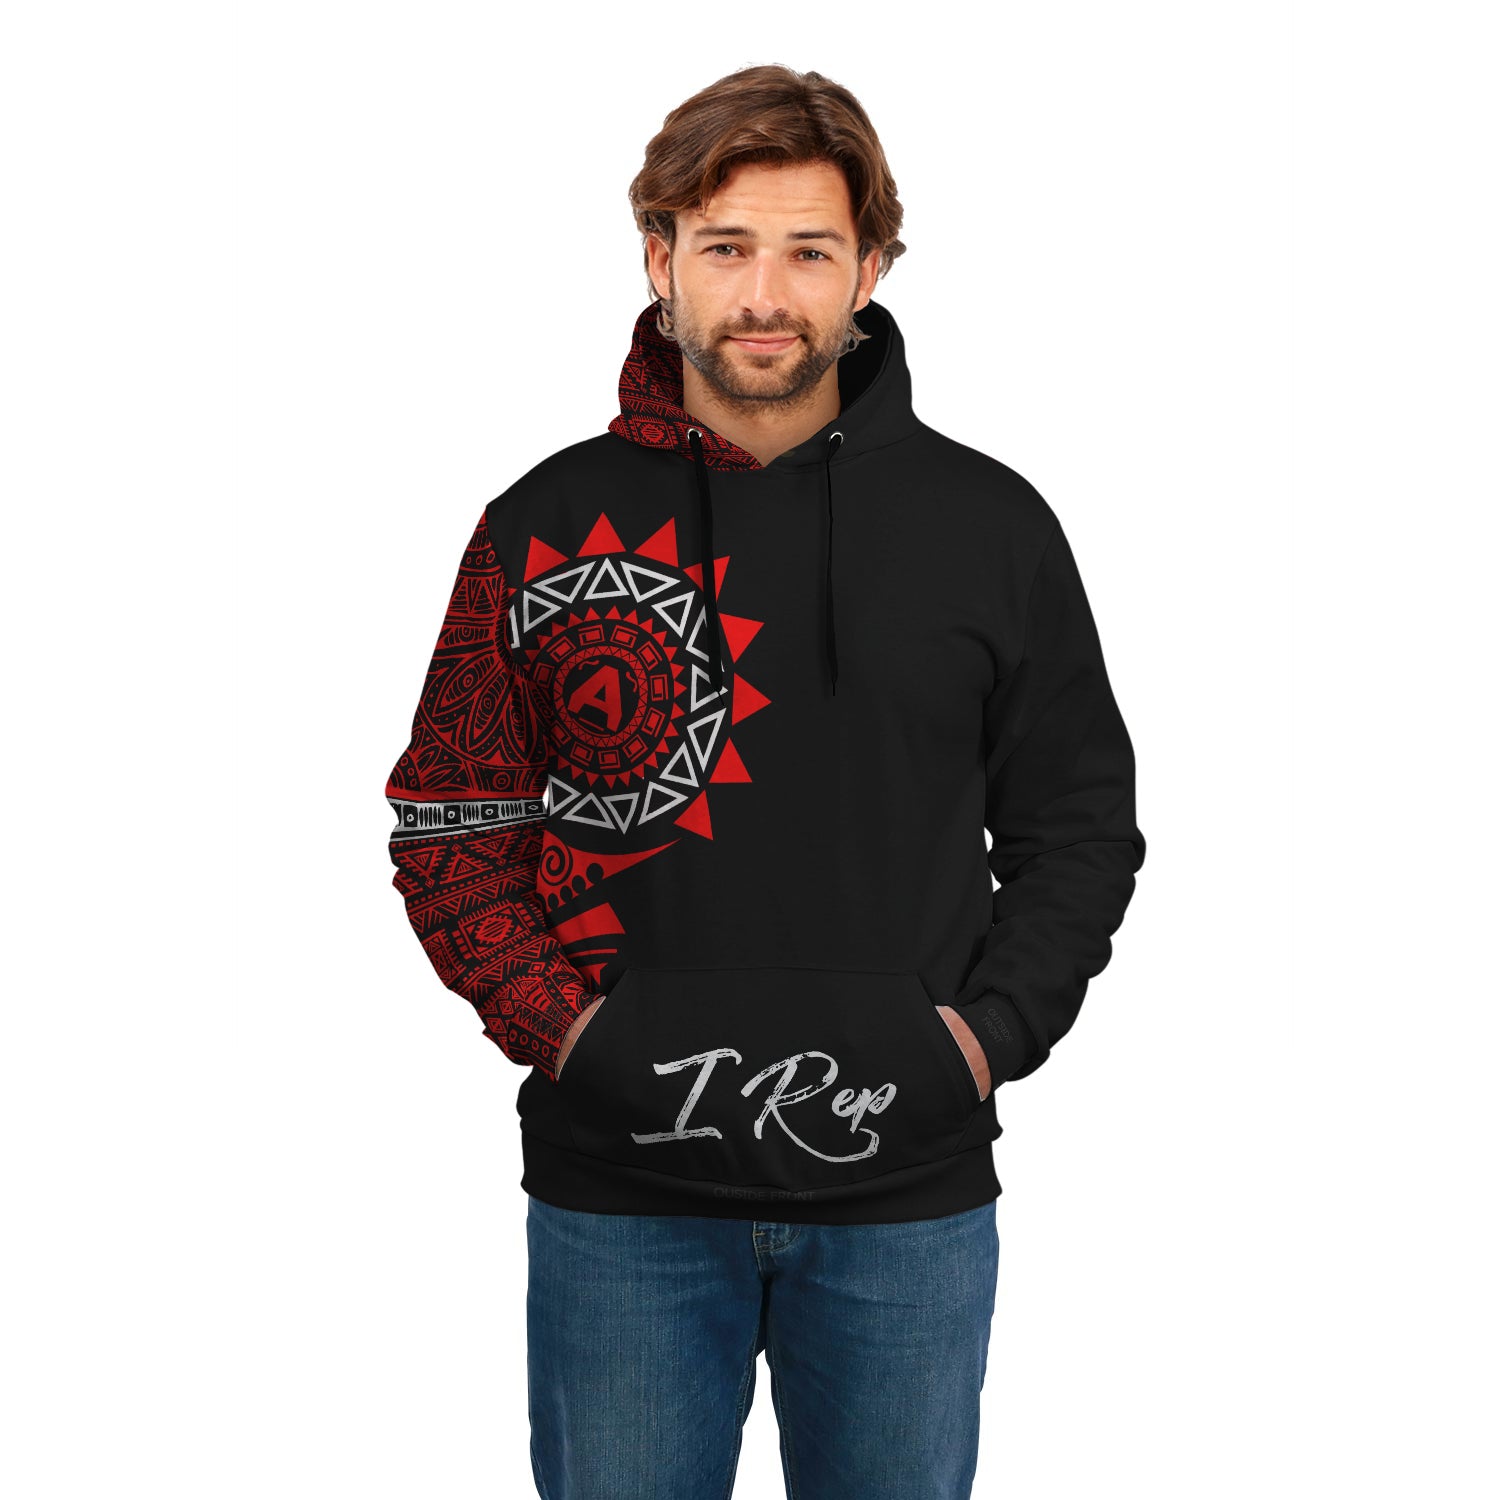 I REP FRONT POCKET HOODIE - Red